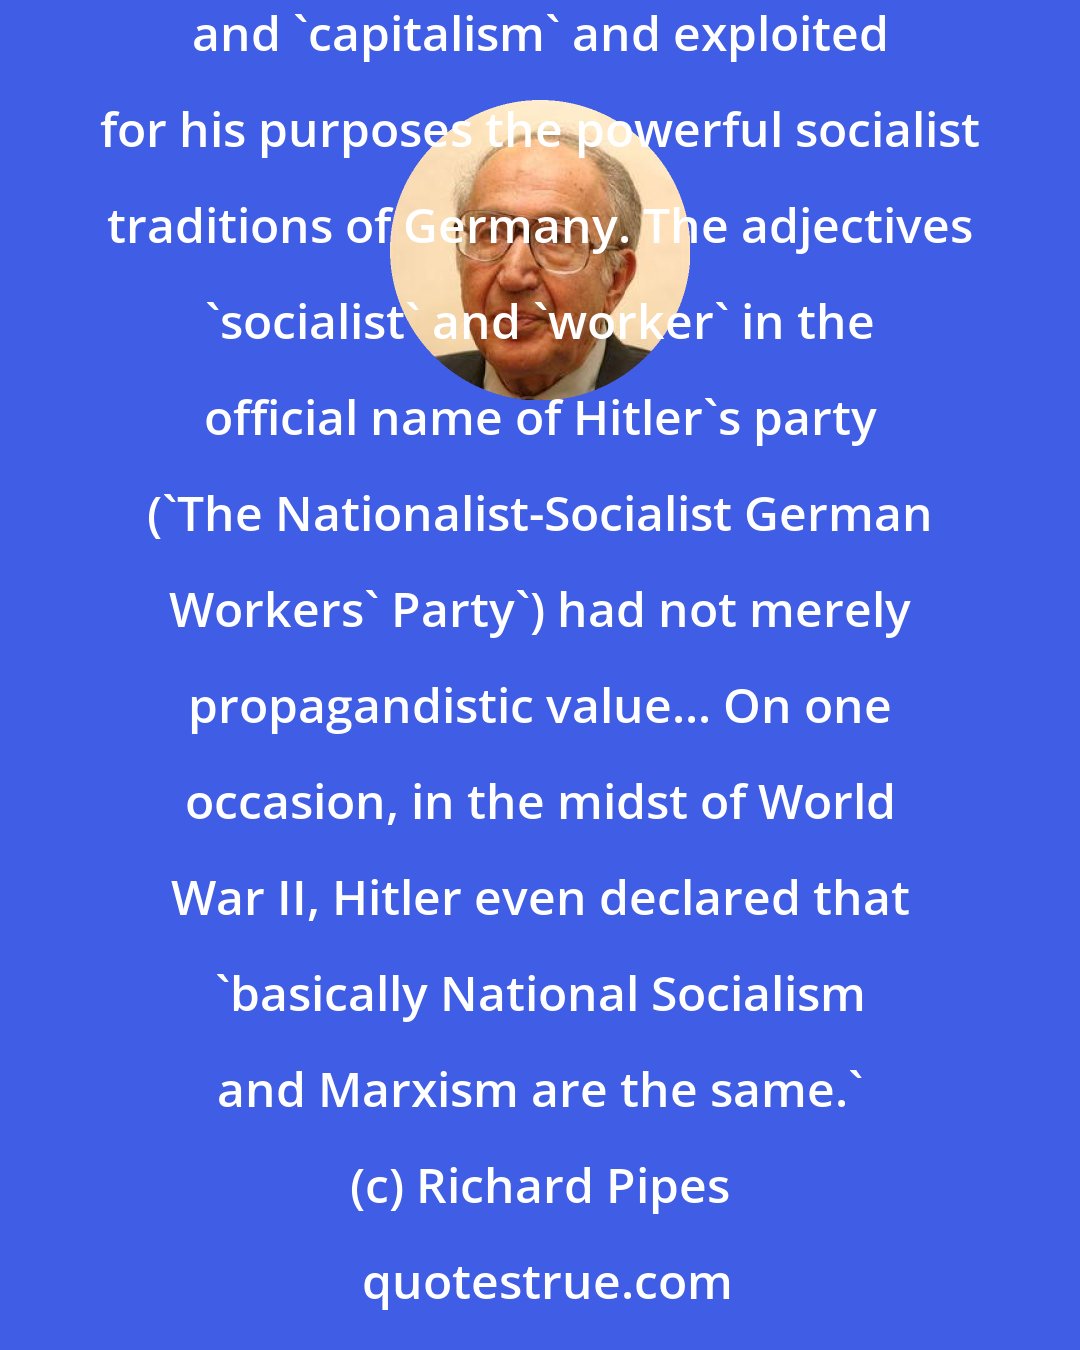 Richard Pipes: Hitler did not have Mussolini's revolutionary socialist background... Nevertheless, he shared the socialist hatred and contempt for the 'bourgeoisie' and 'capitalism' and exploited for his purposes the powerful socialist traditions of Germany. The adjectives 'socialist' and 'worker' in the official name of Hitler's party ('The Nationalist-Socialist German Workers' Party') had not merely propagandistic value... On one occasion, in the midst of World War II, Hitler even declared that 'basically National Socialism and Marxism are the same.'